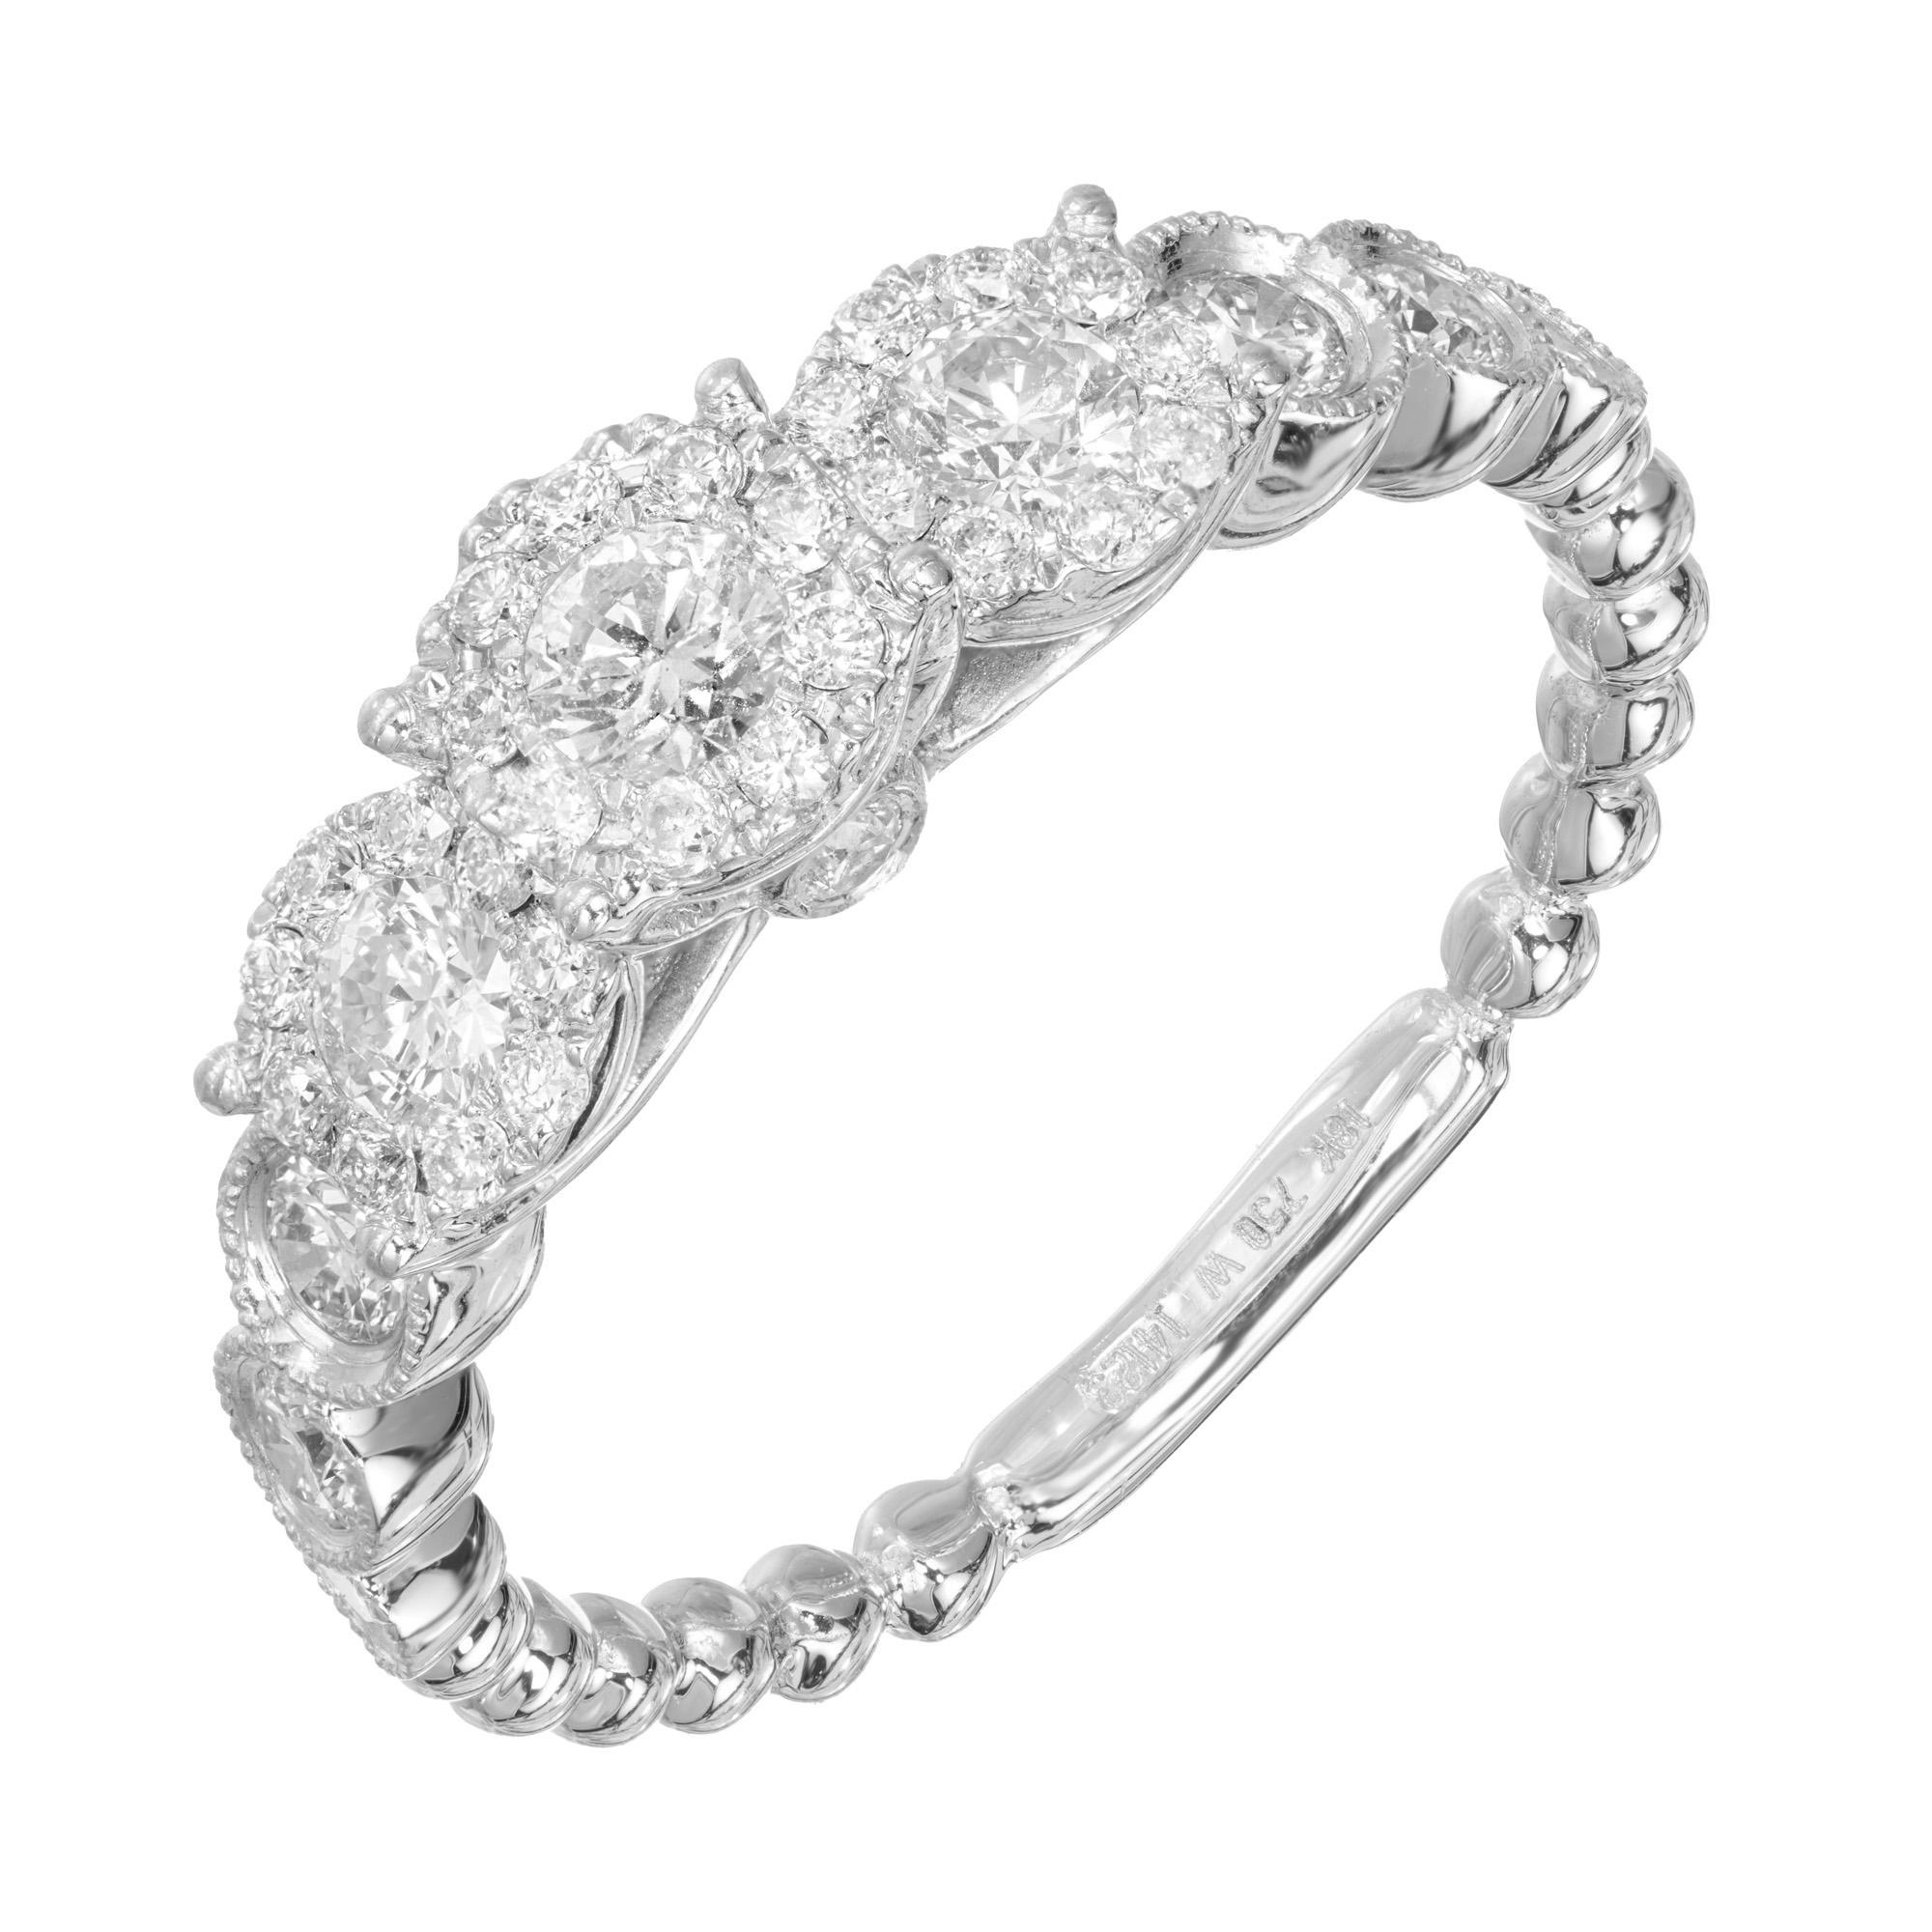 Triple Diamond engagement ring. Three center diamonds each with a halo of round cut diamonds set in an 18k white gold setting. A total of 38 round cut sparkly diamonds. 

38 round diamonds, approx. total weight .72cts, H, SI
Size 7 and sizable
18k